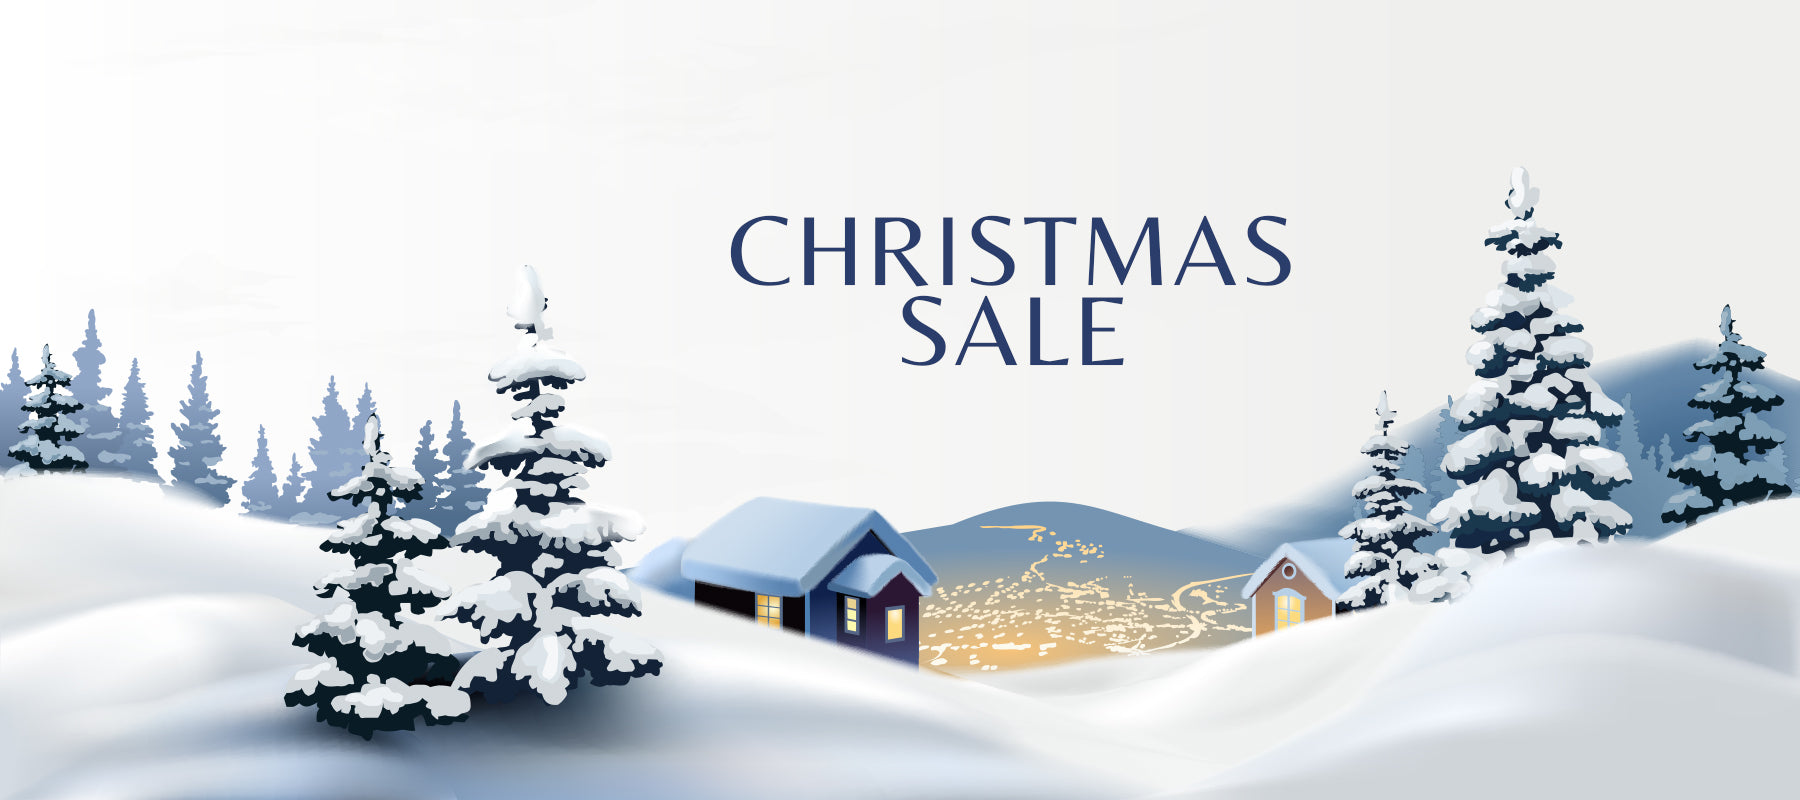 The Biggest Christmas Sale!